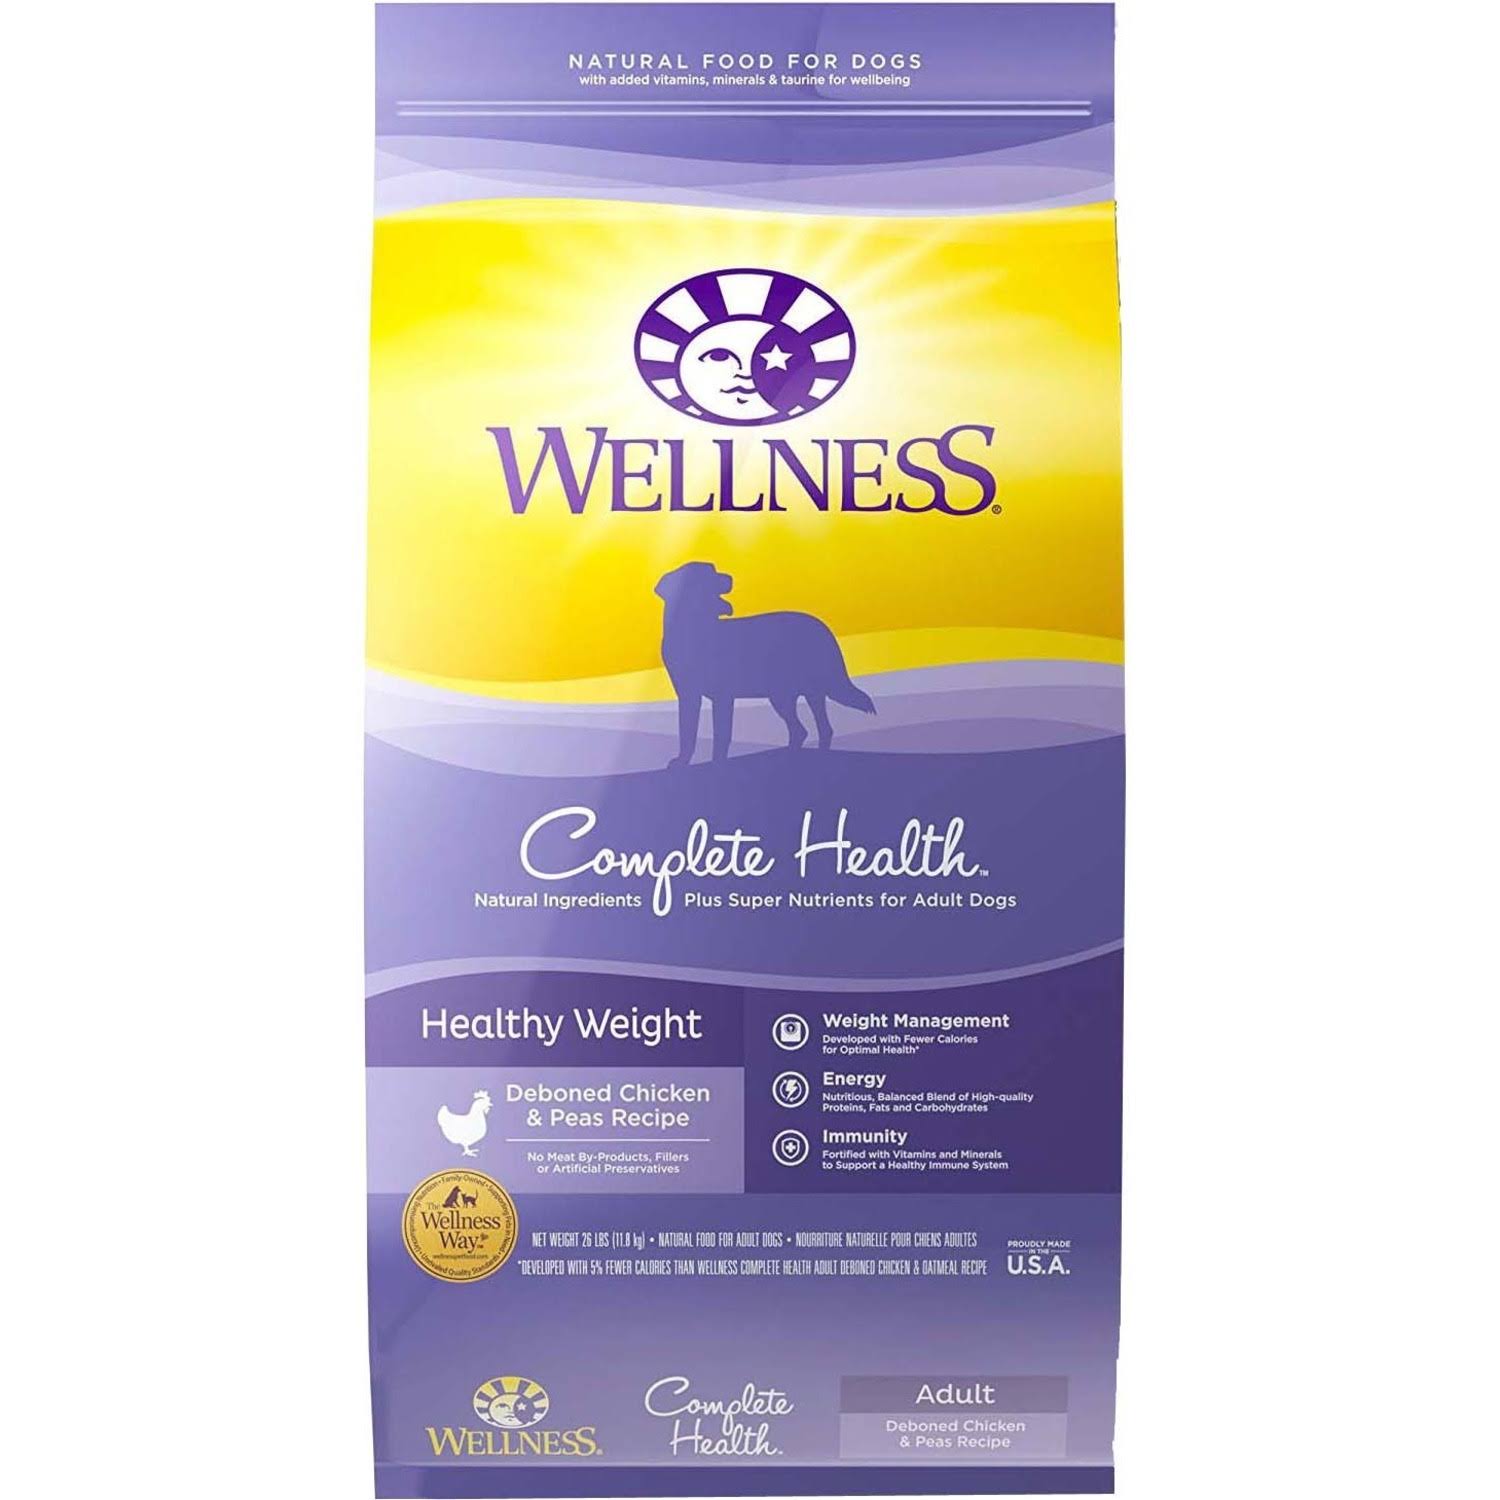 Wellness Complete Health Healthy Weight Dog Food - Deboned Chicken and Peas, Adult, 26lbs